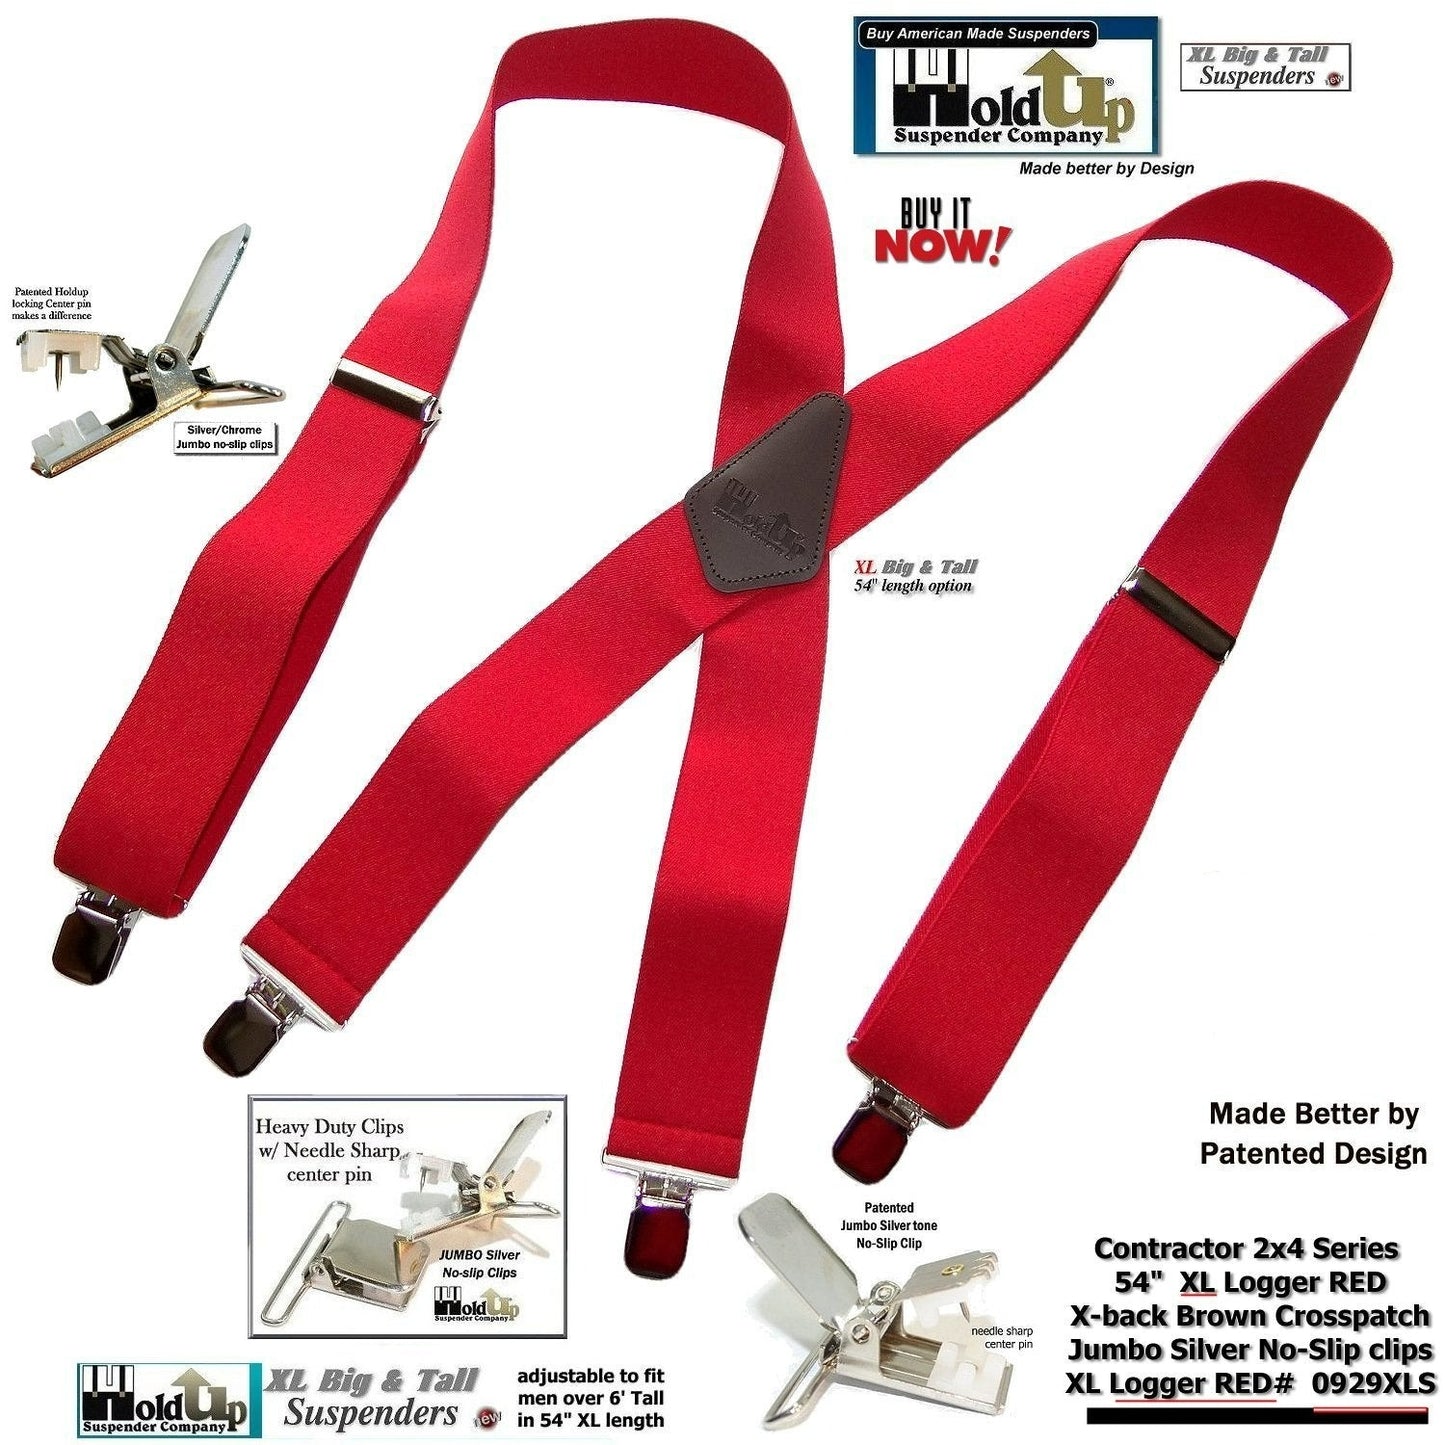 Hold-Ups XL Logger Red Suspenders 2" wide X-back with Patented No-slip Nickel metal clips